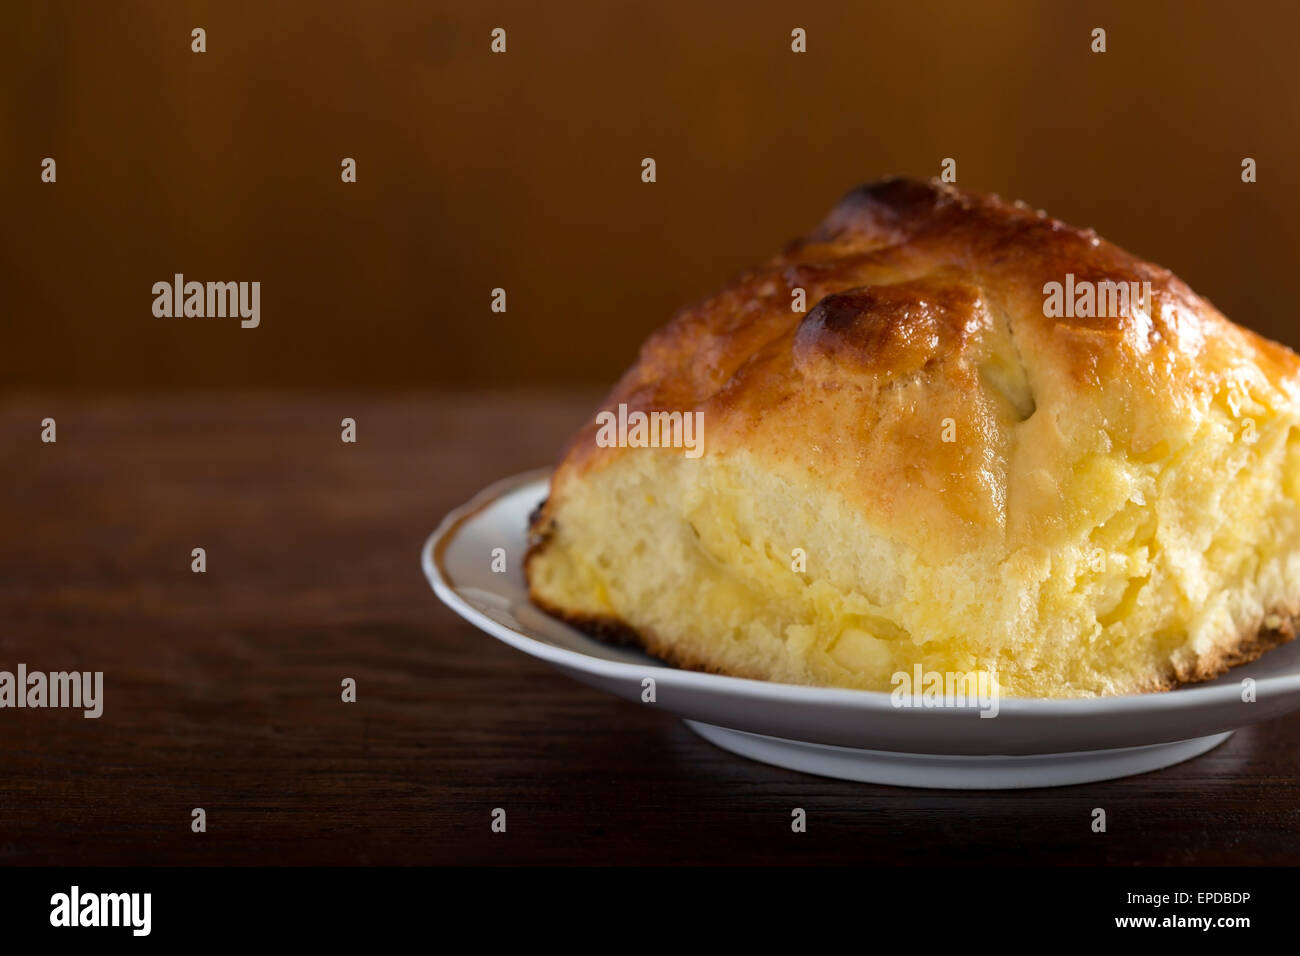 Cheese pie in plate on a wooden table Stock Photo